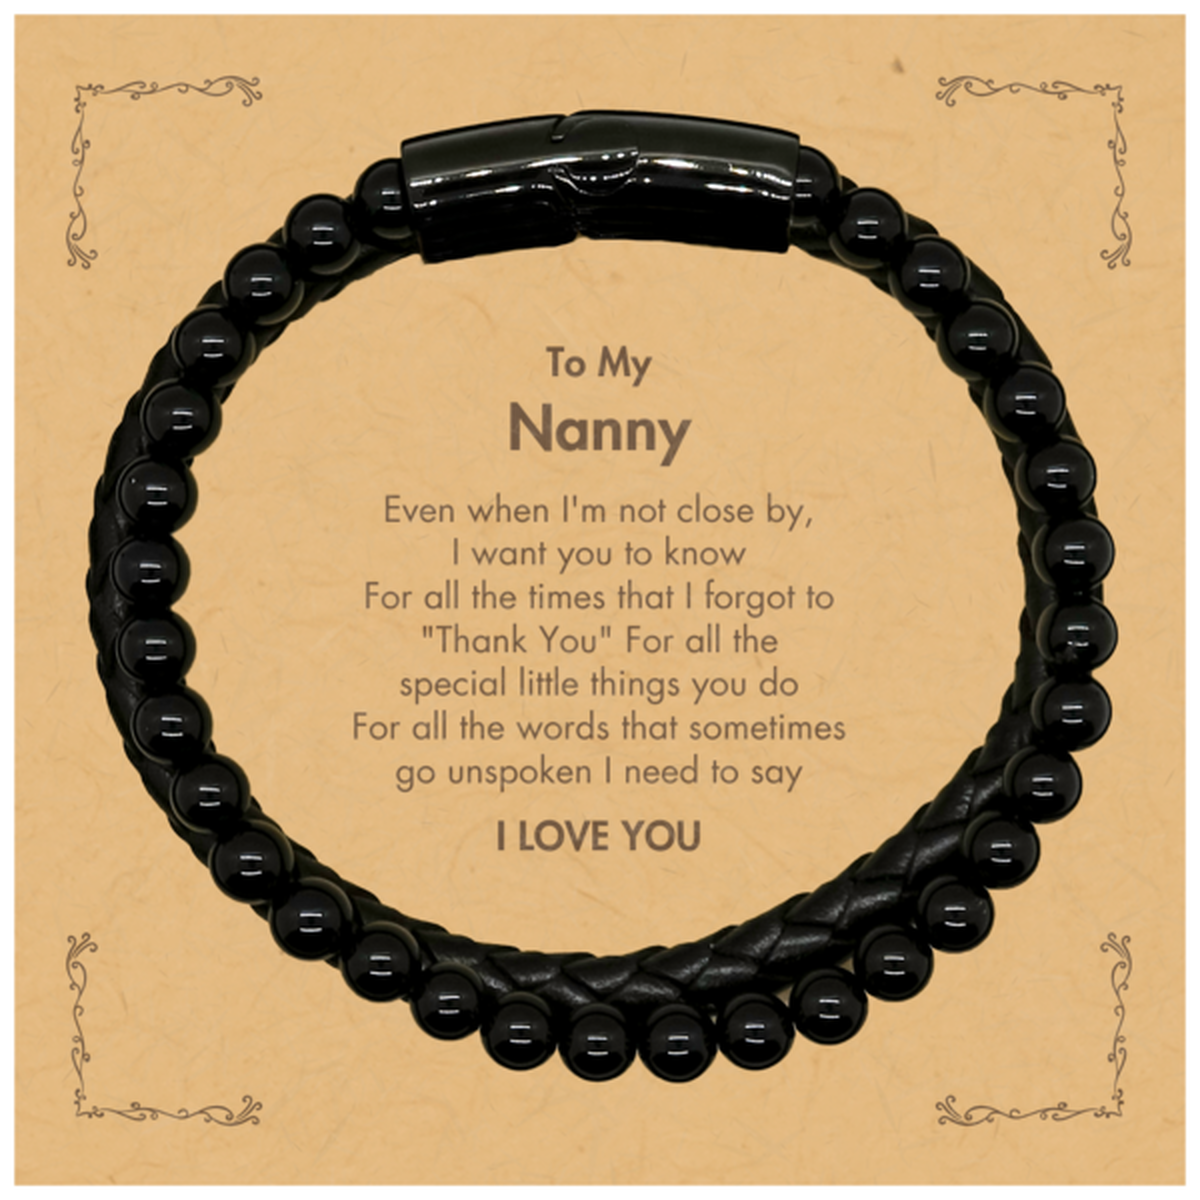 Thank You Gifts for Nanny, Keepsake Stone Leather Bracelets Gifts for Nanny Birthday Mother's day Father's Day Nanny For all the words That sometimes go unspoken I need to say I LOVE YOU